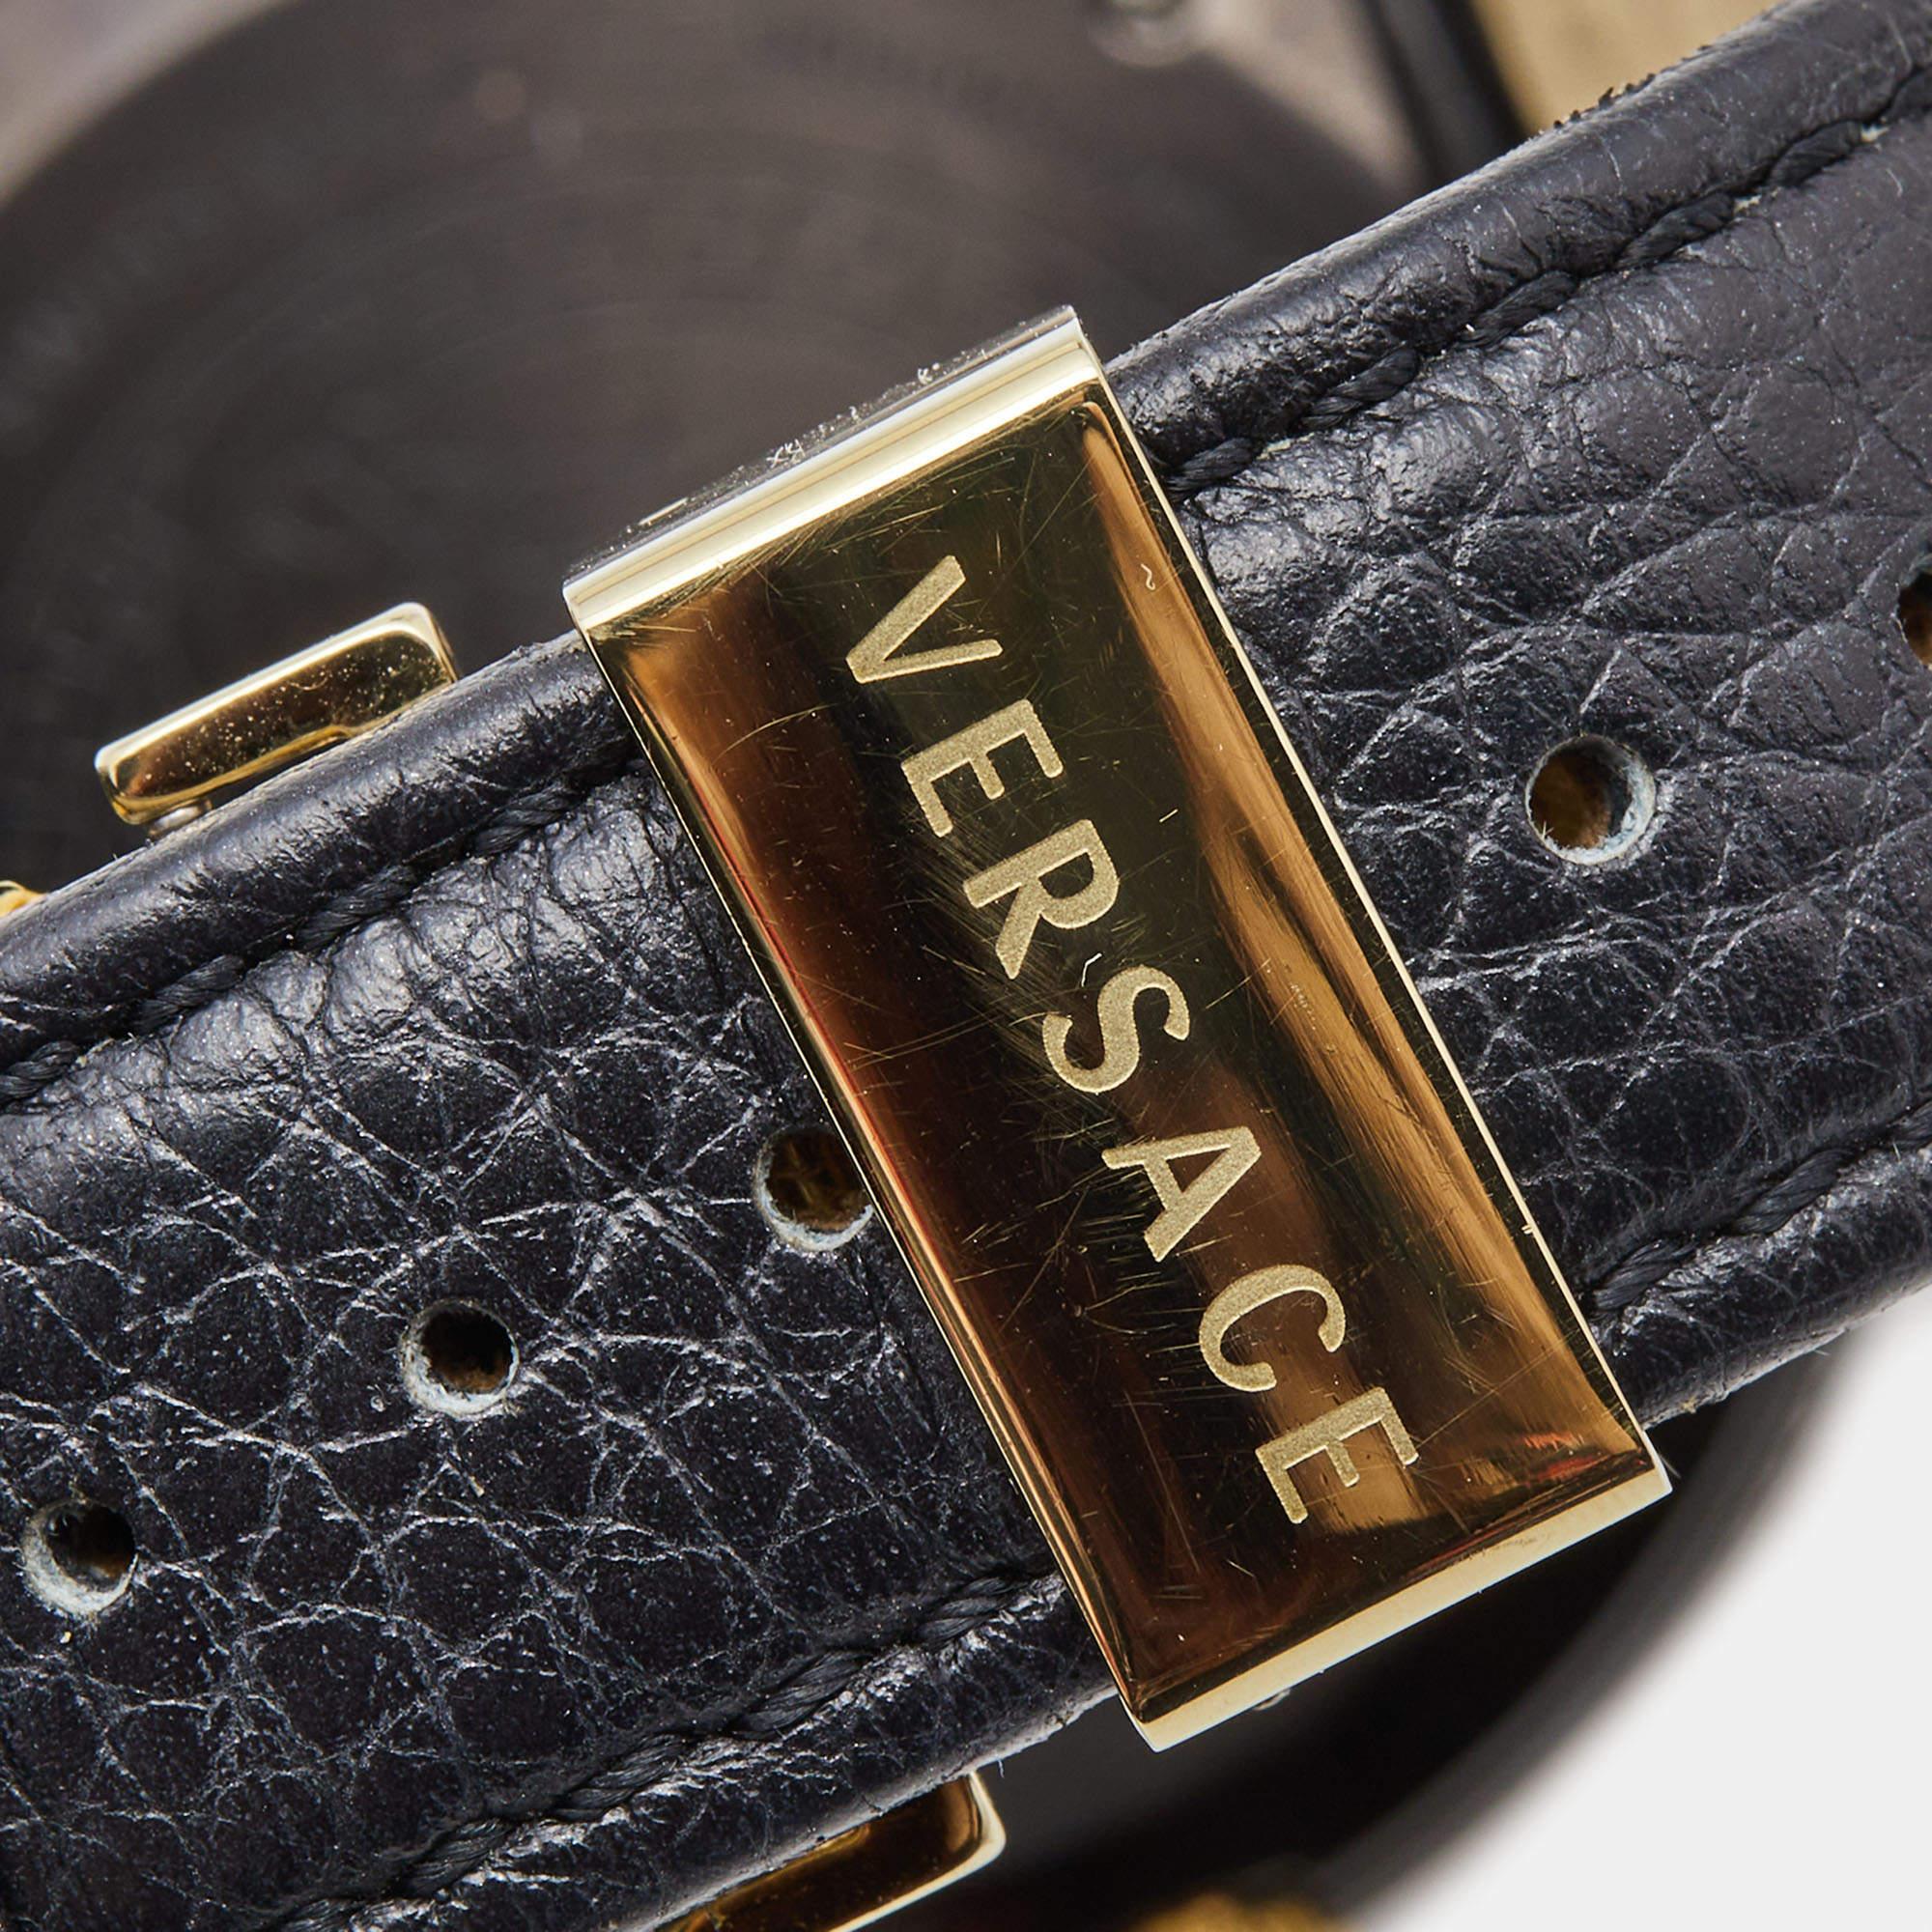 Let this fine designer wristwatch accompany you with ease and luxurious style. Beautifully crafted using the best quality materials, this authentic Versace watch is built to be a standout accessory for your wrist.

